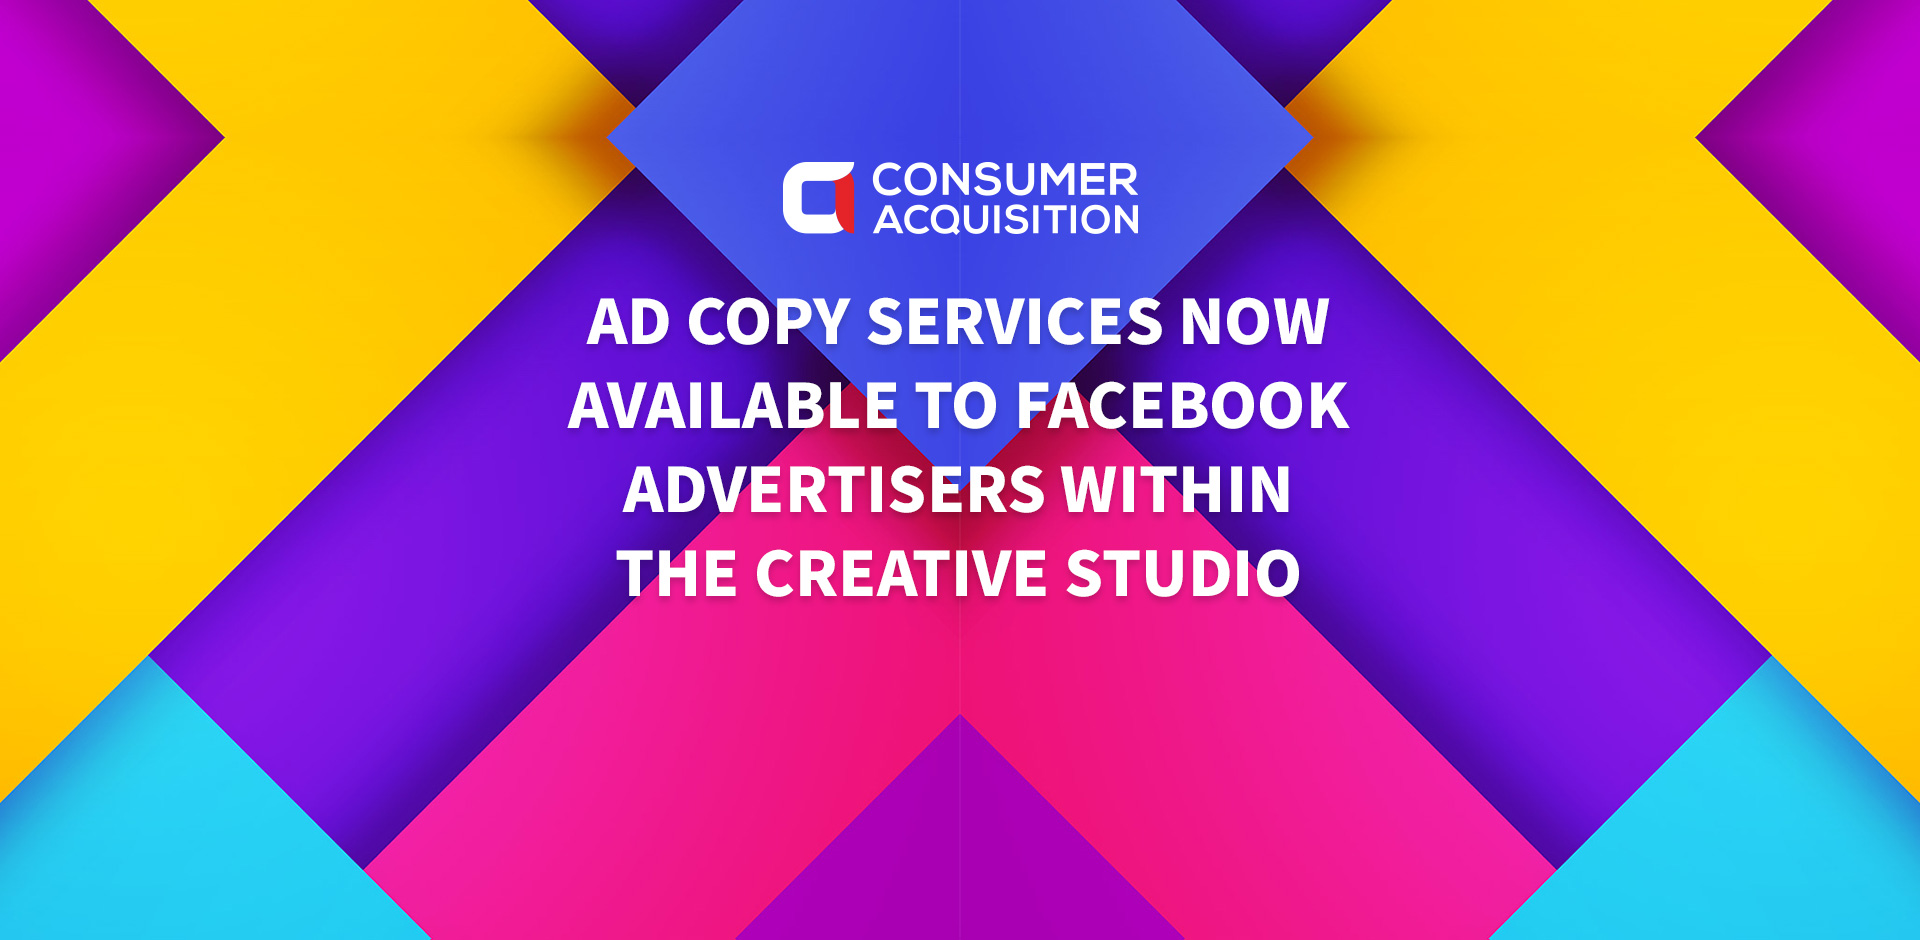 Ad Copy Services Now Available to Facebook Advertisers within the Creative Studio